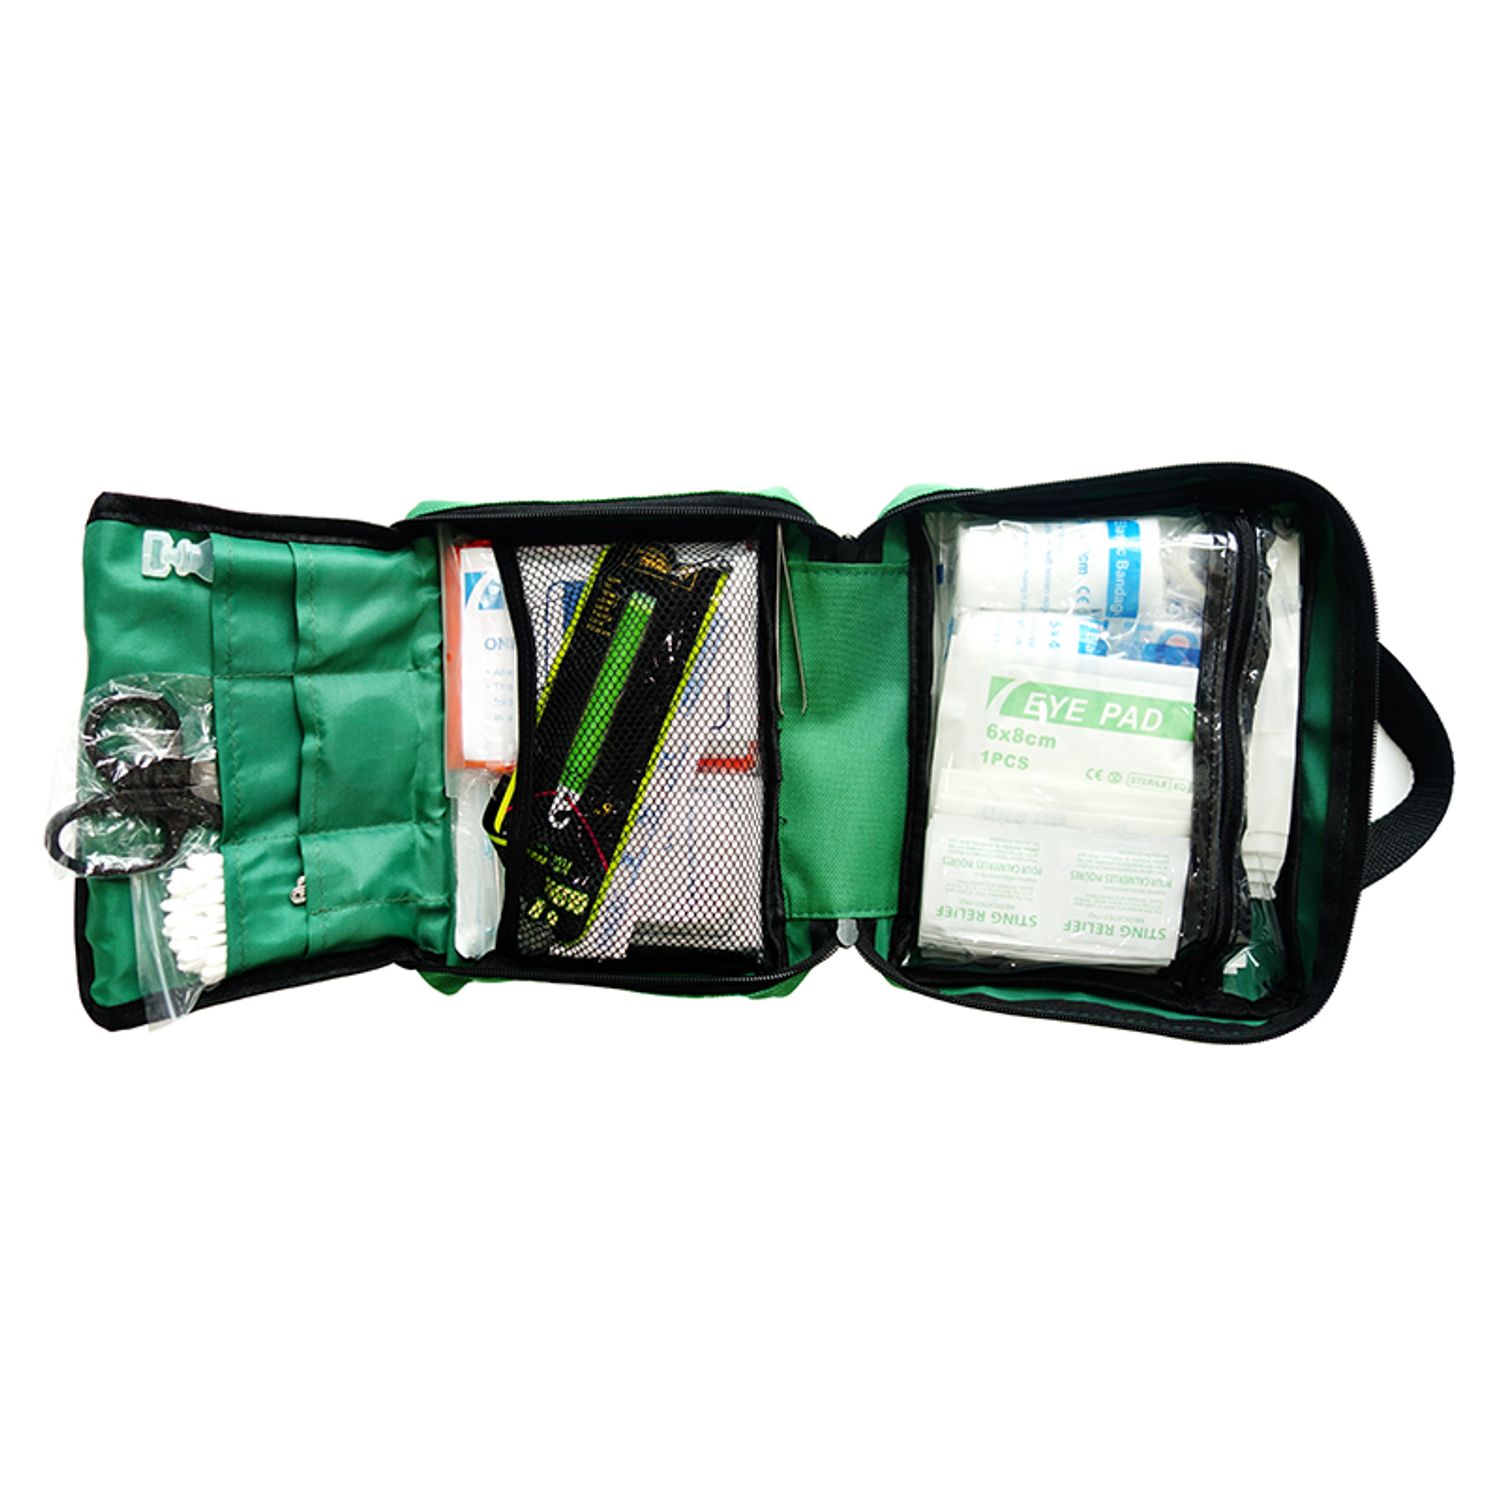 inner display of green First Aid kit